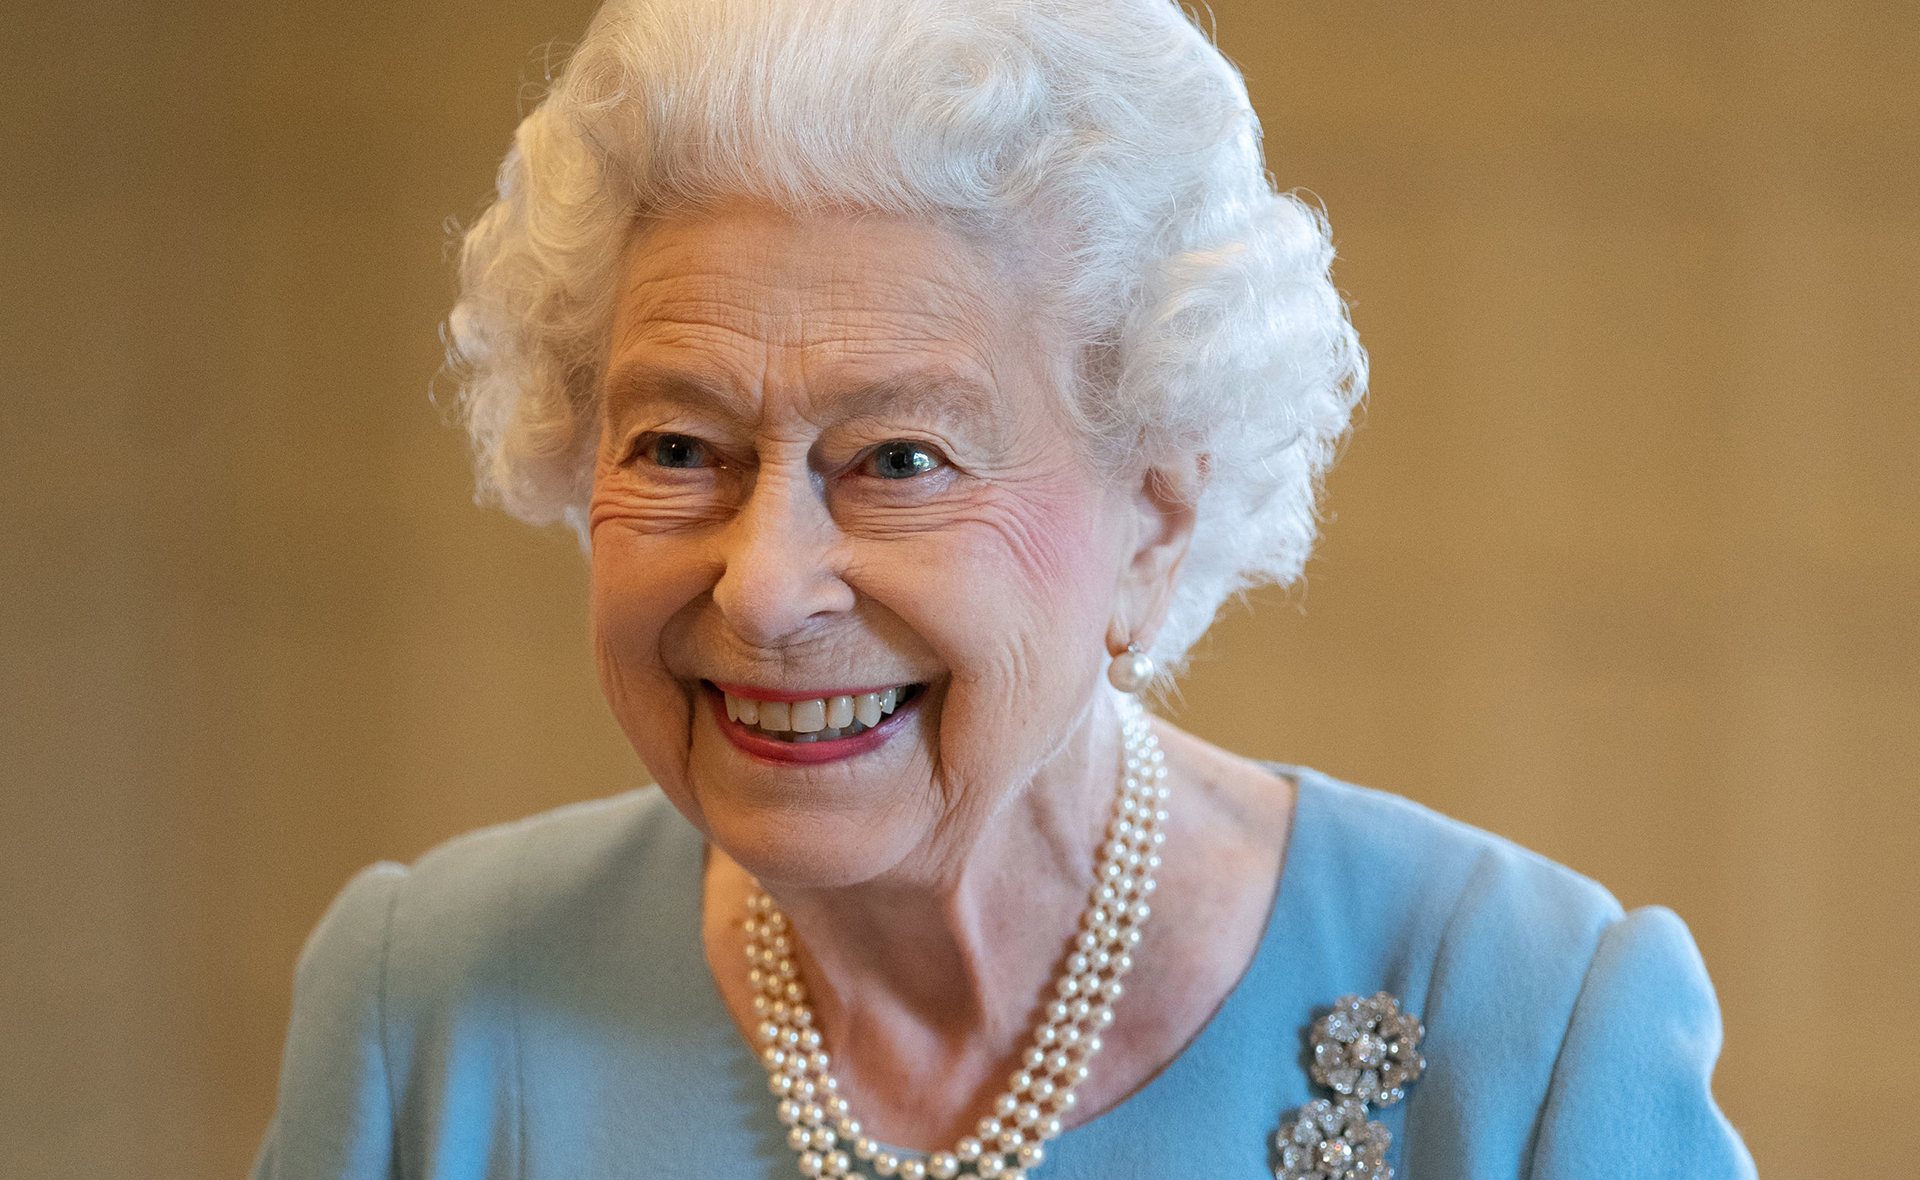 The Queen returns to Windsor Castle and royal duties after making her plans for the monarchy’s future clear